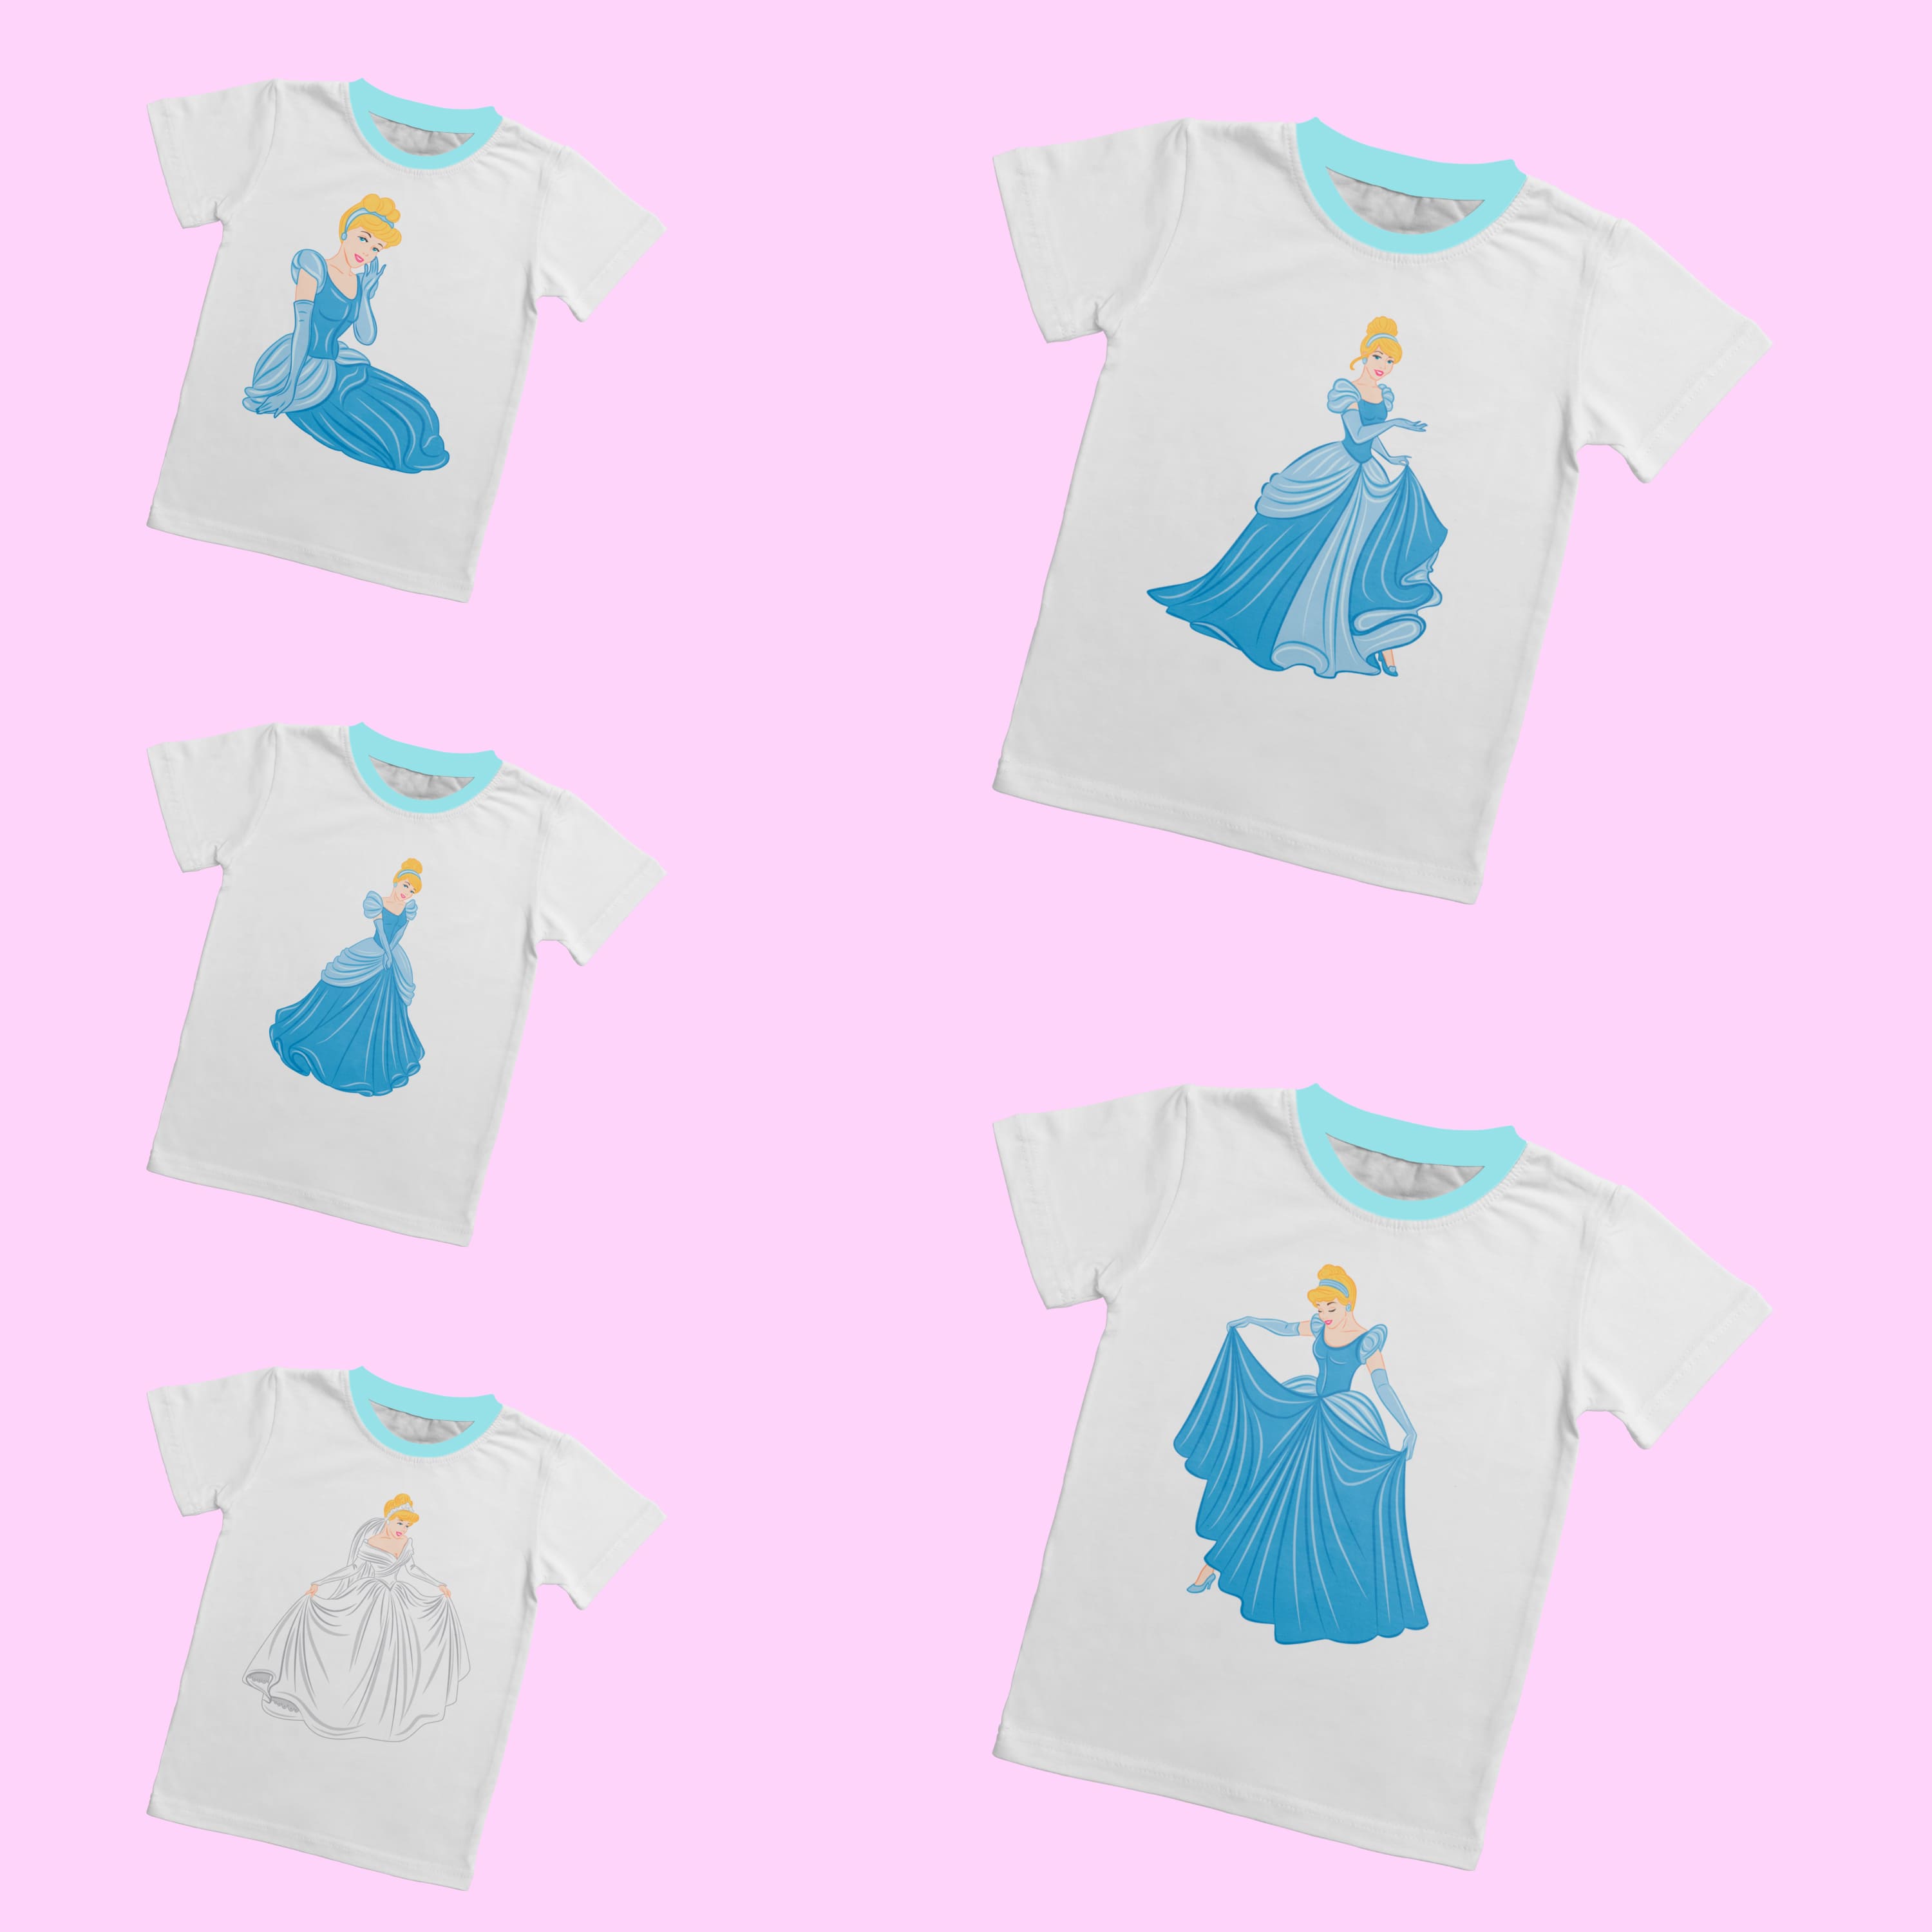 A selection of images of T-shirts with colorful Cinderella print.